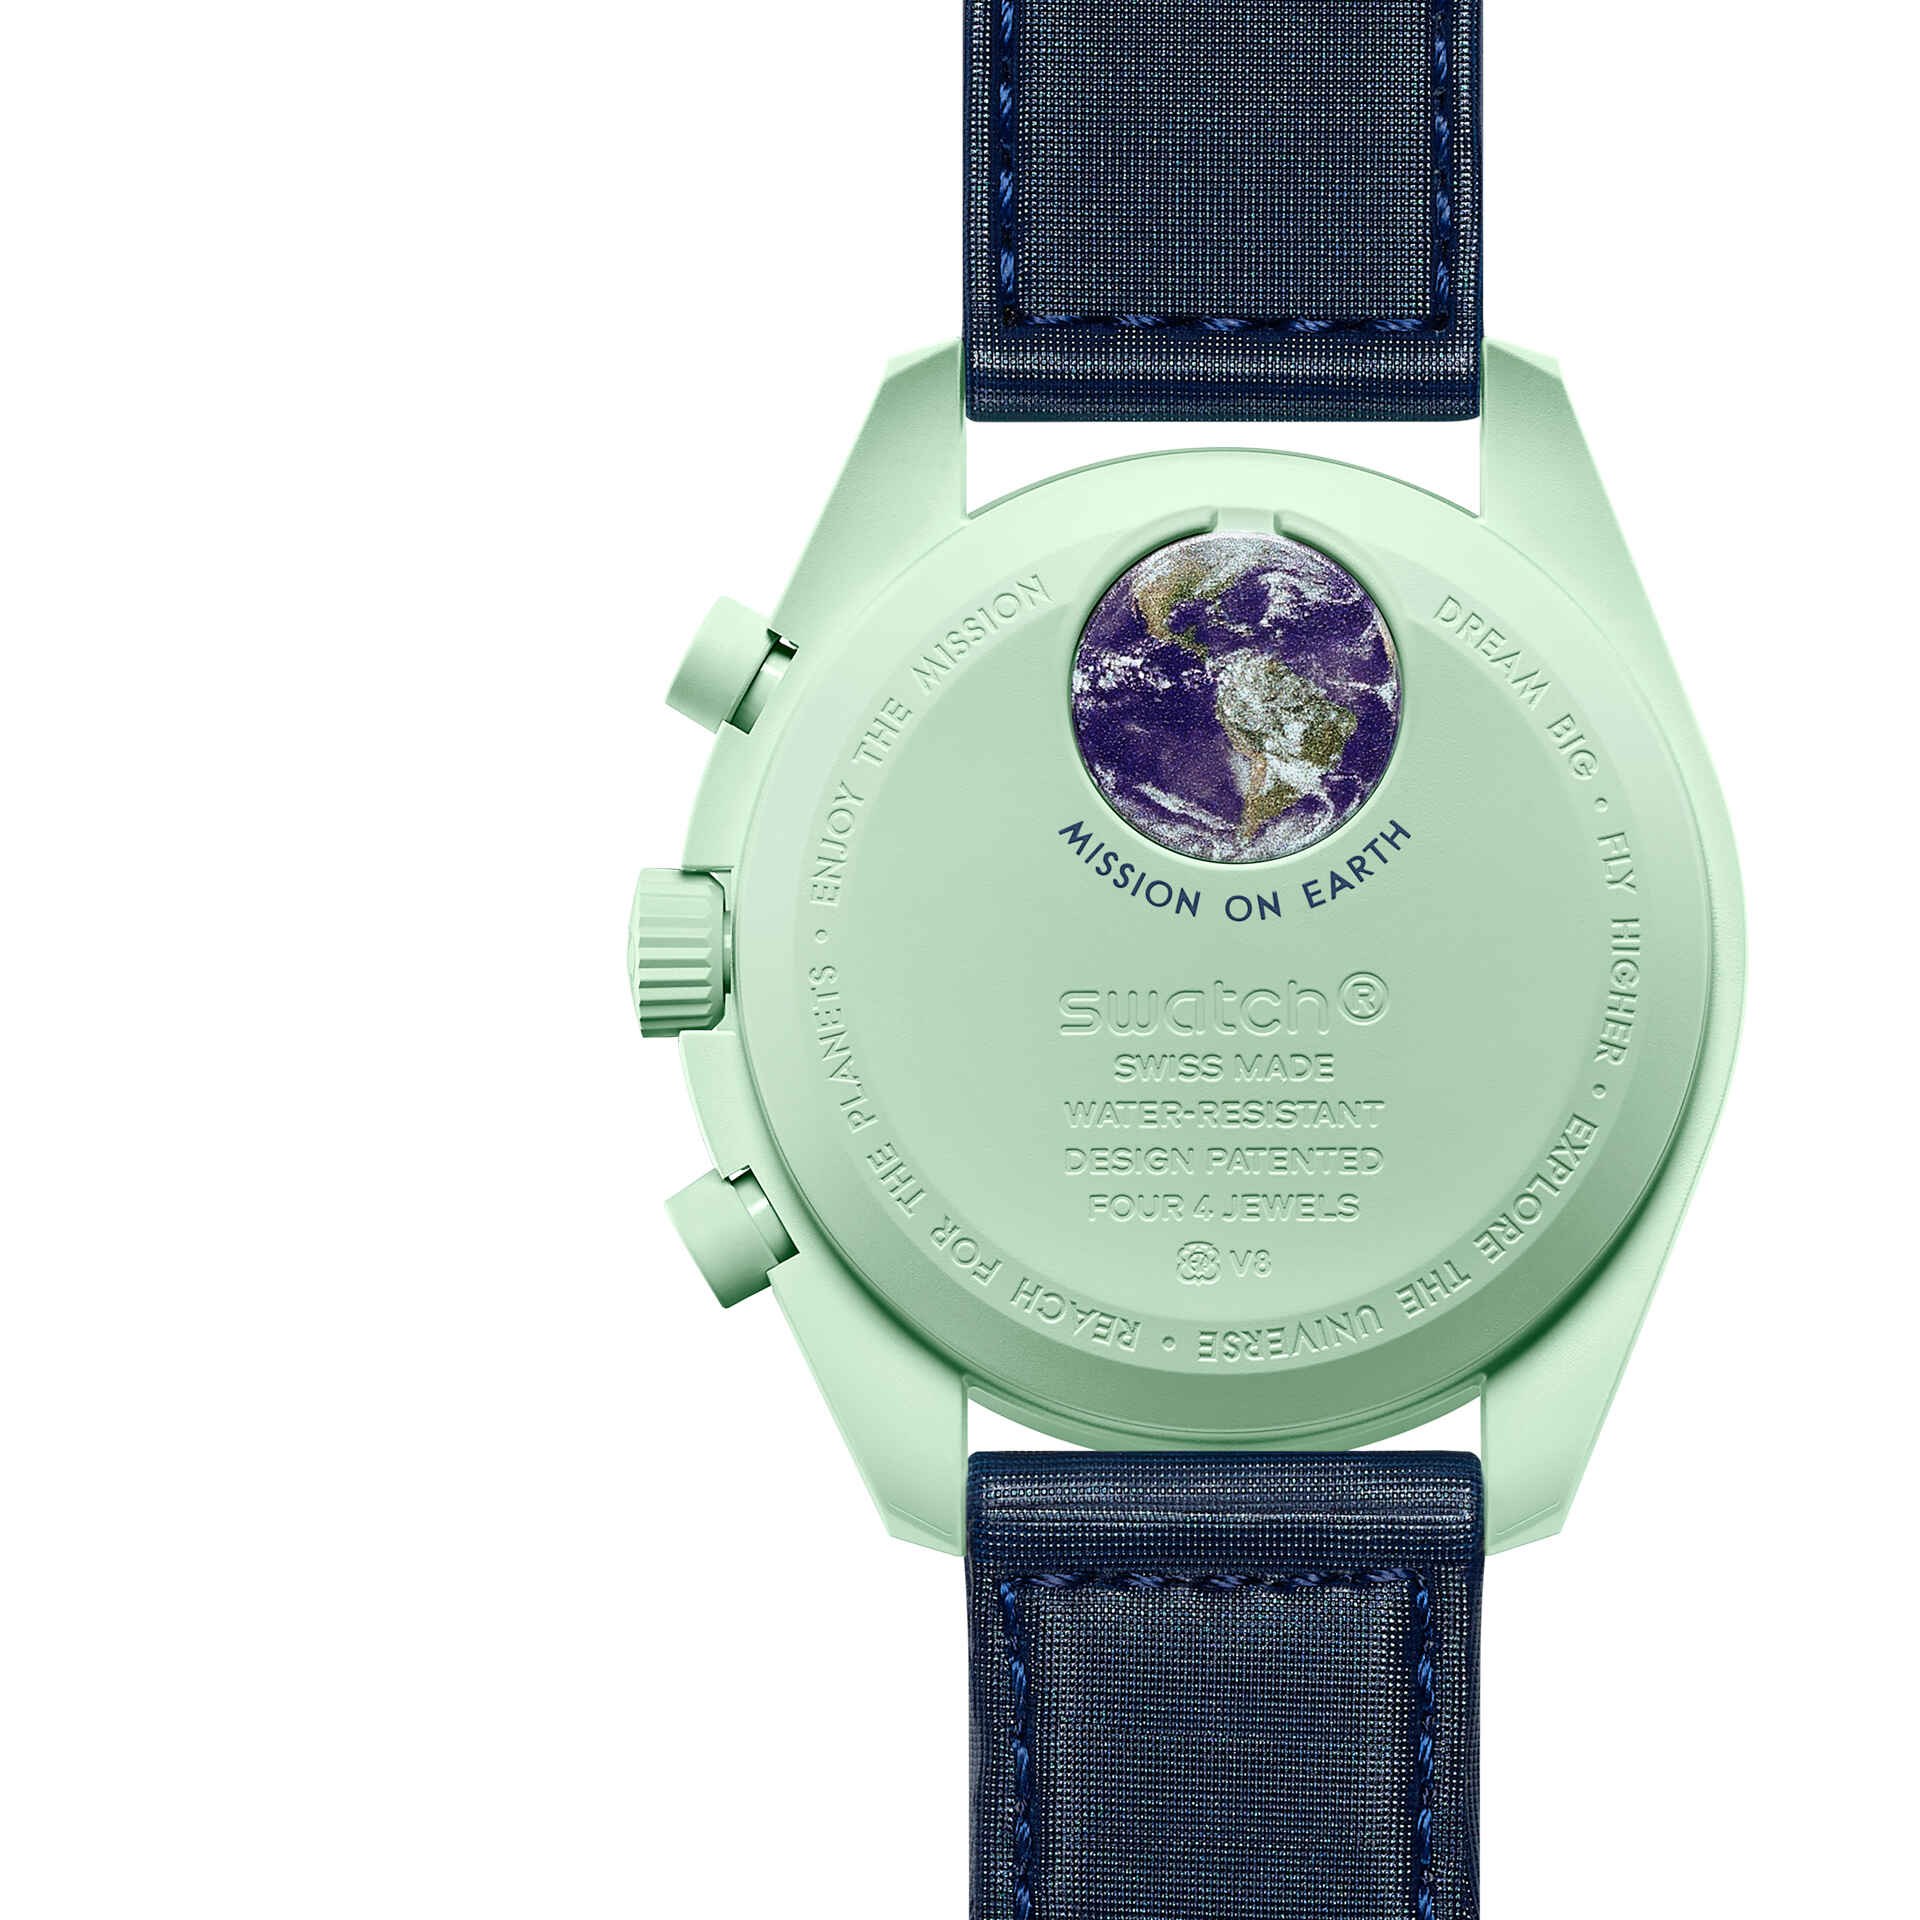 Omega x Swatch Speedmaster "Moonswatch" - Mission on Earth - Perpetual